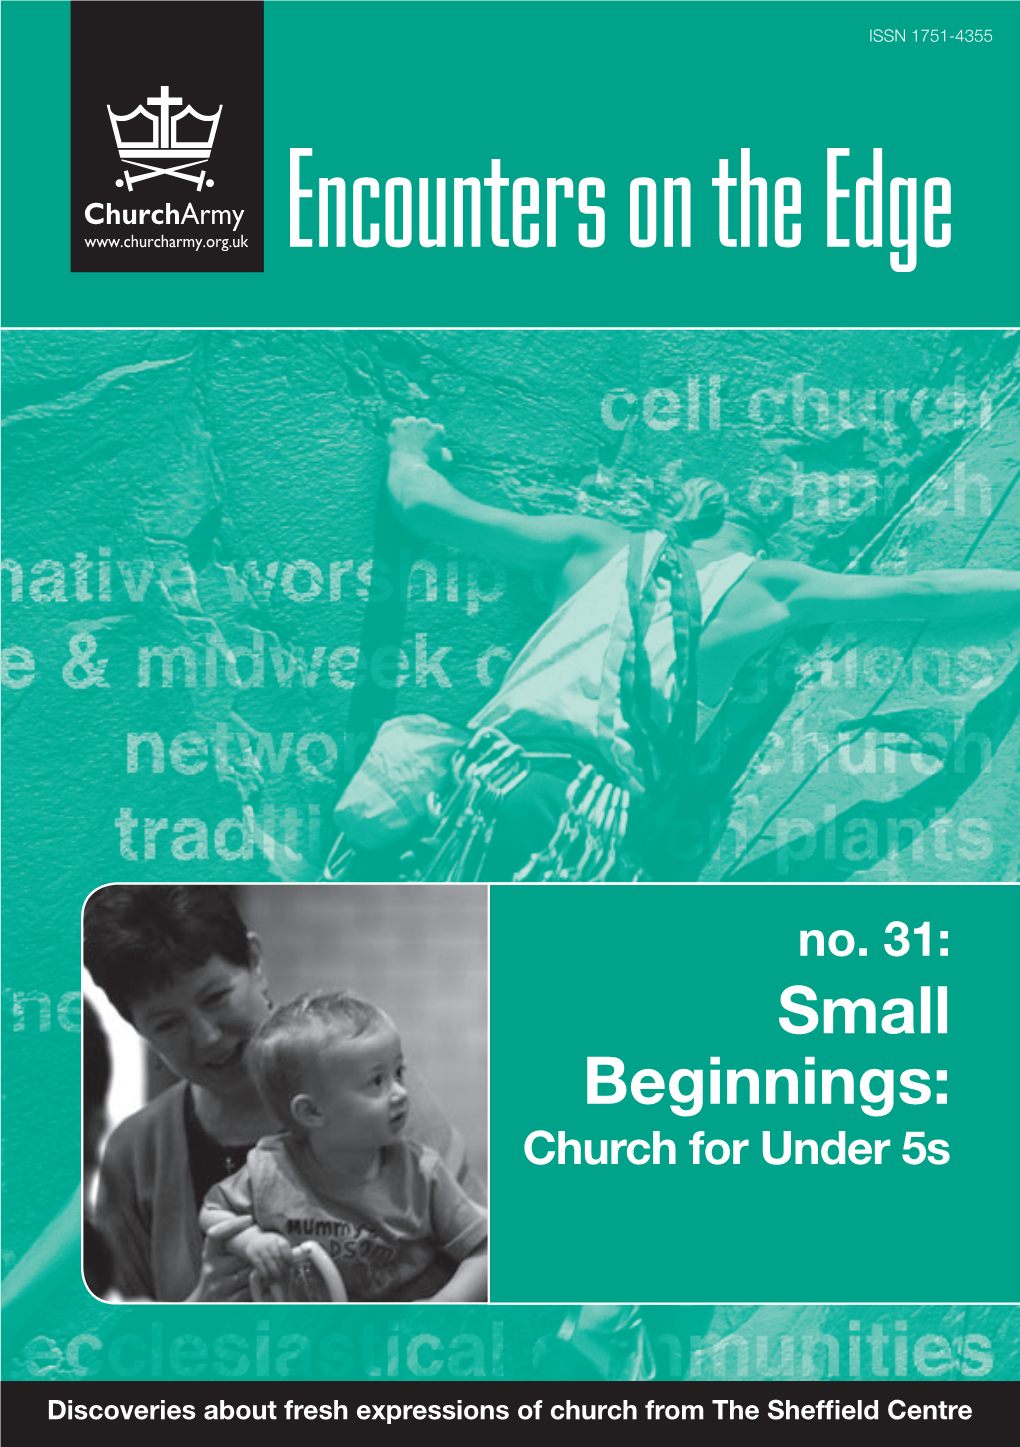 Church for Under 5S